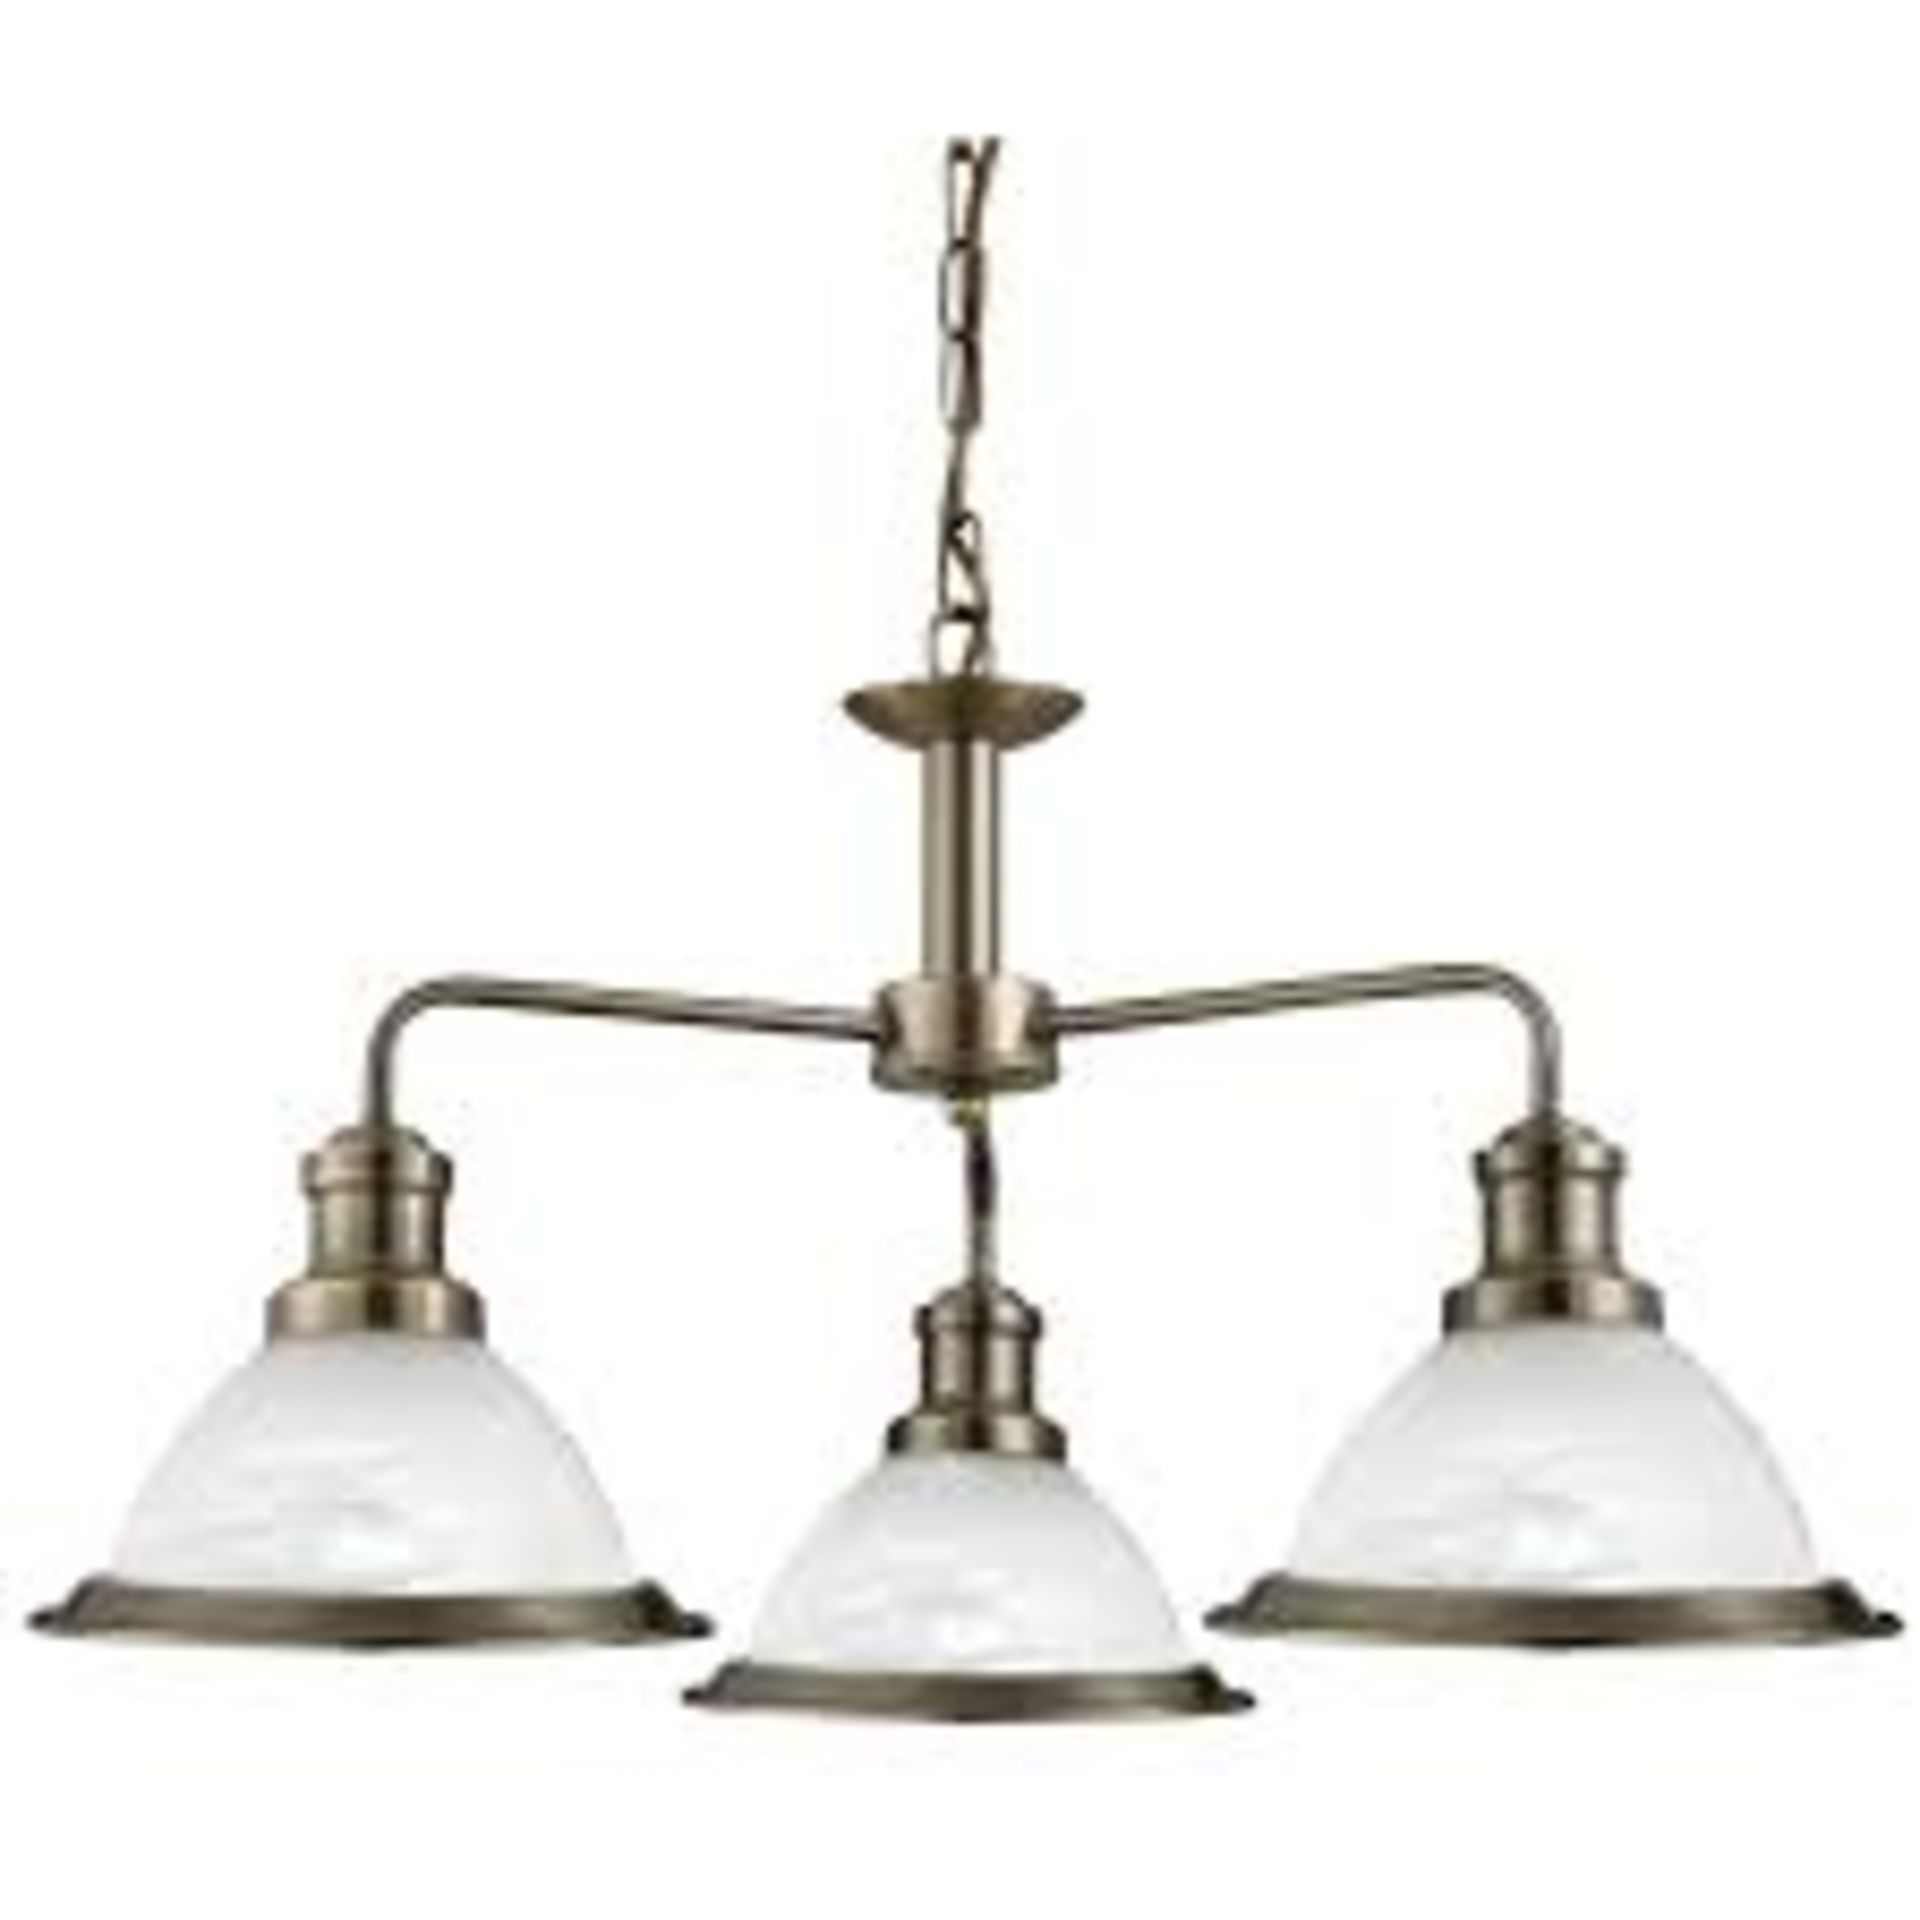 1 x Searchlight Industrial Ceiling Light in Antique Brass - Ref: 1593-3AB -New and Boxed - RRP: £100 - Image 2 of 4